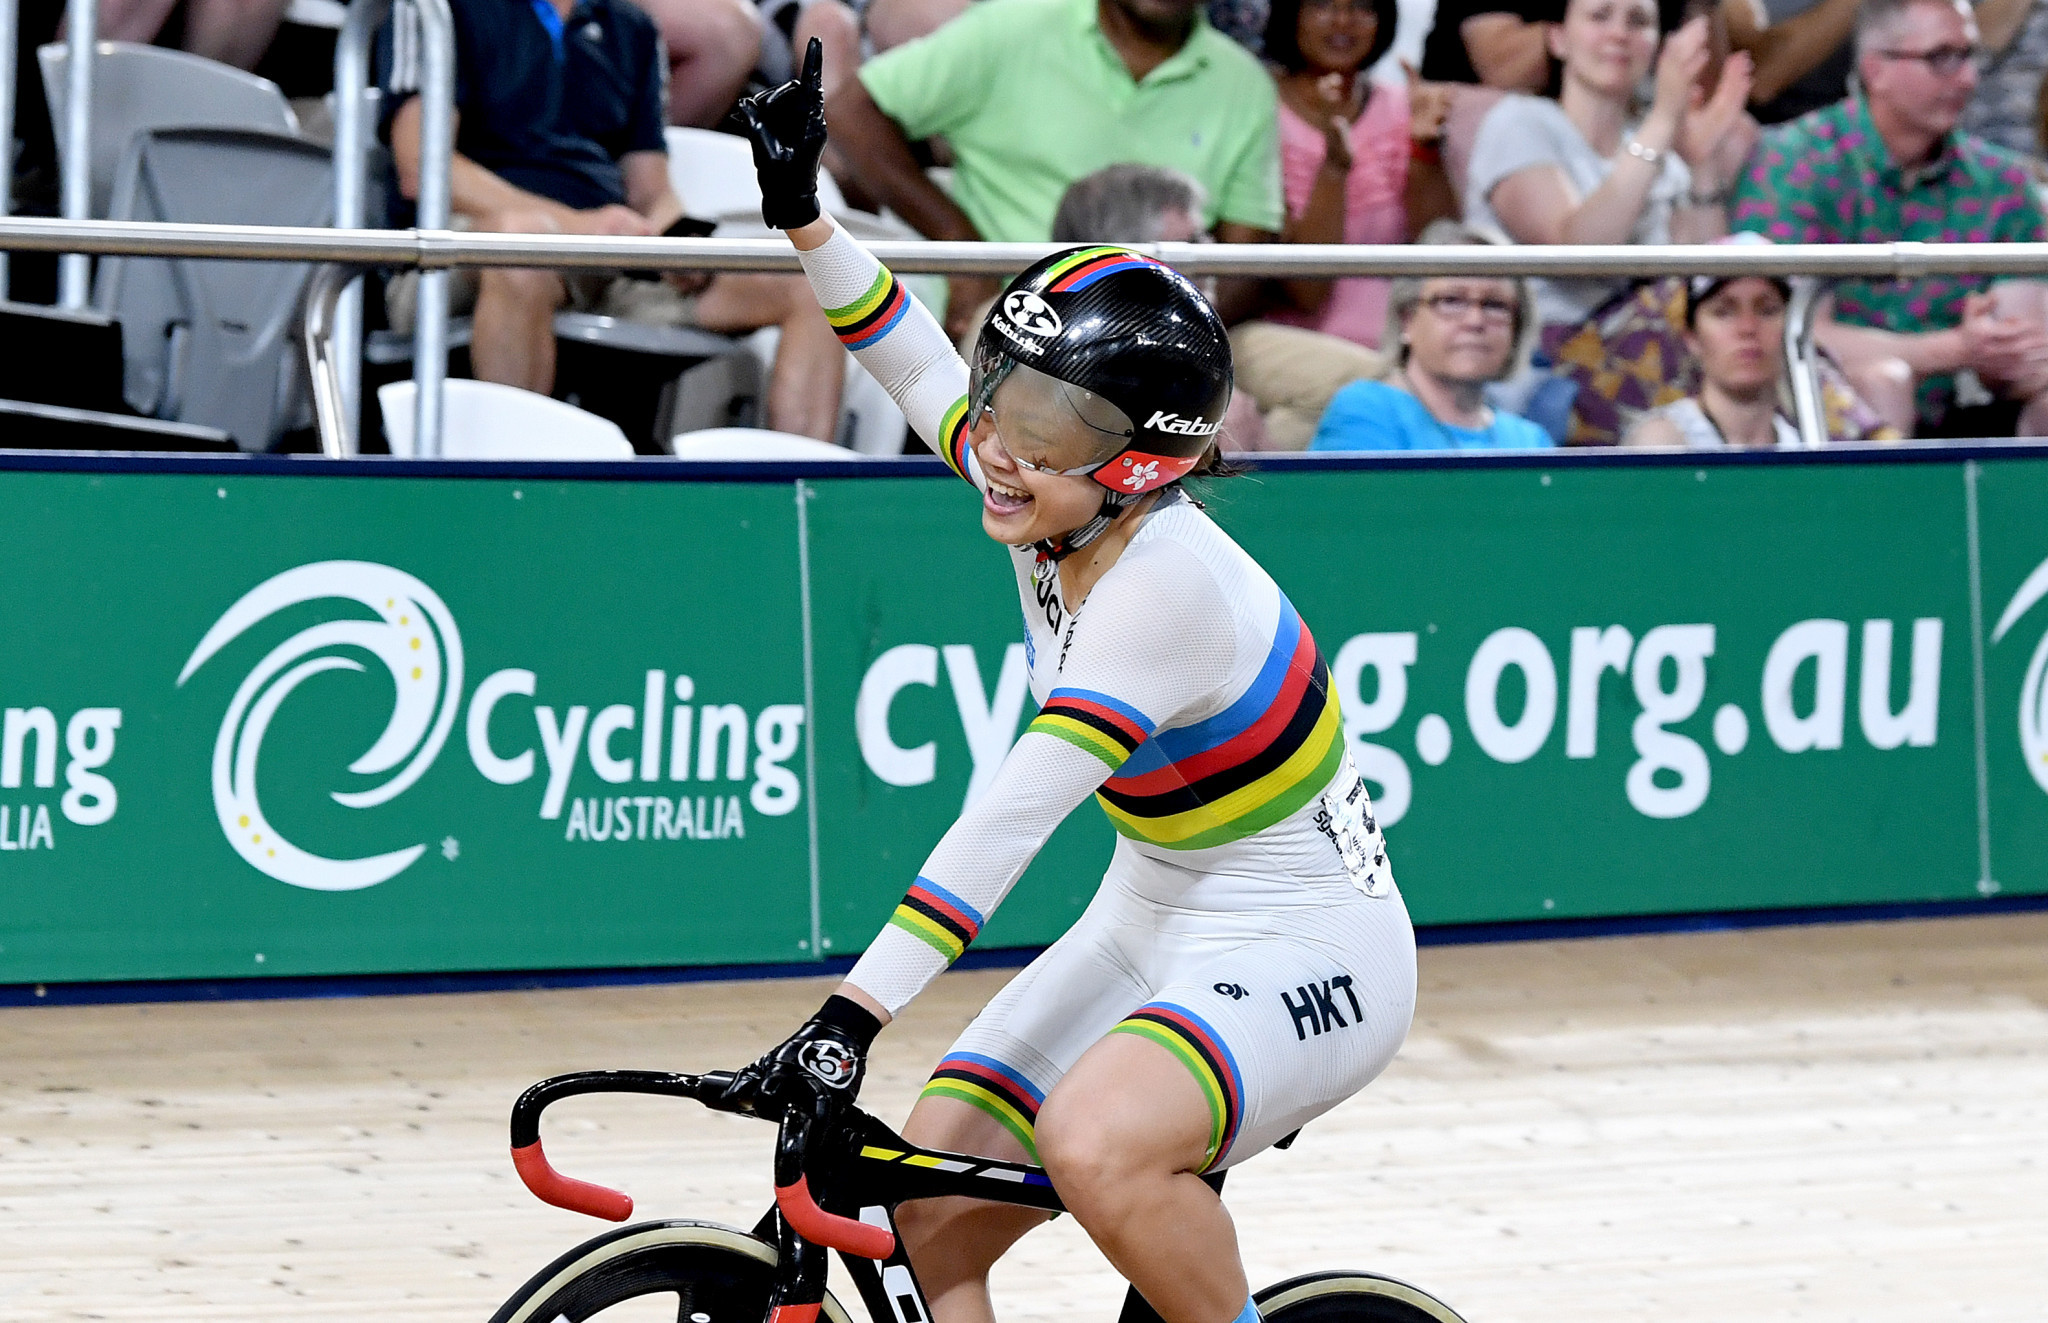 Lee overcomes home favourite at UCI Track Cycling World Cup in Brisbane